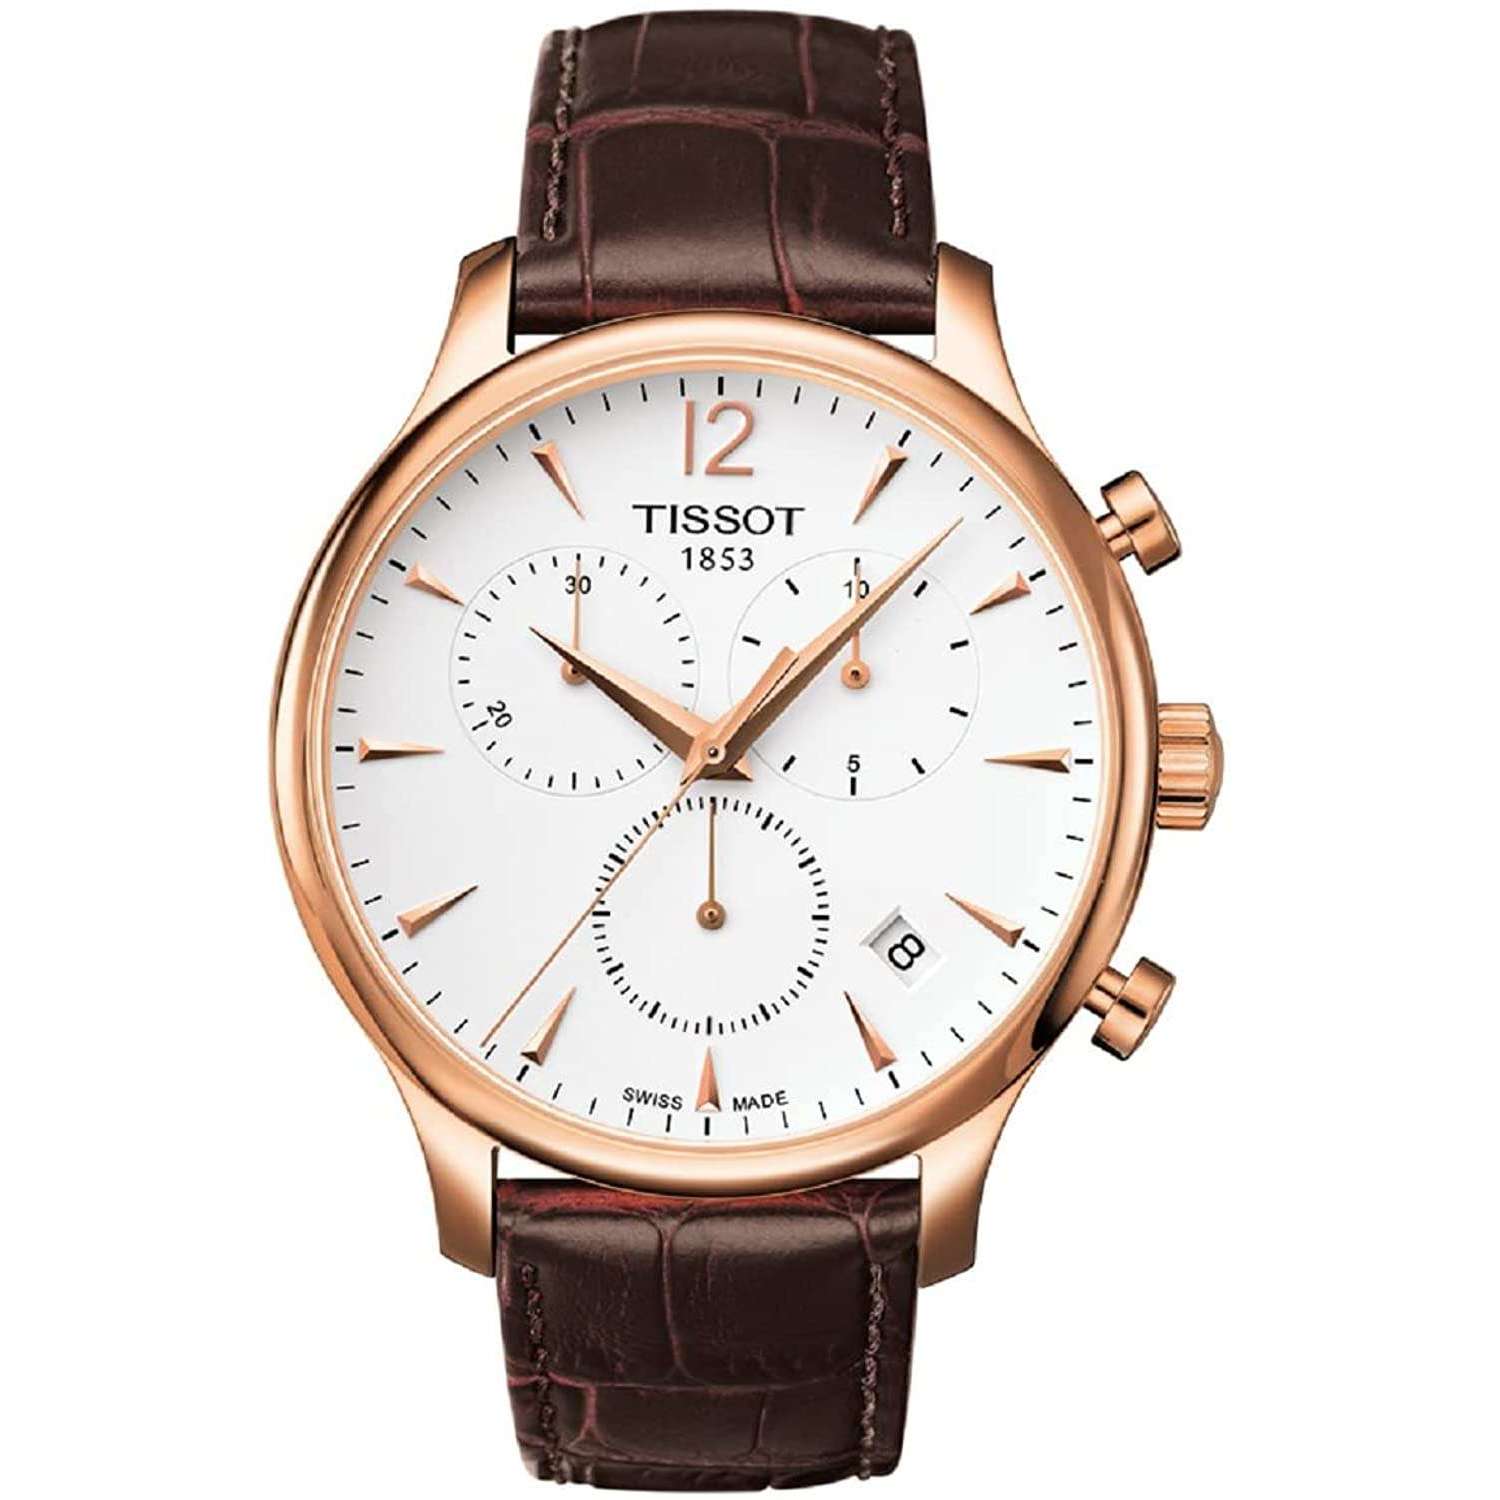 ROOK JAPAN:TISSOT TRADITION CHRONOGRAPH 42 MM MEN WATCH T0636173603700,Luxury Watch,Tissot Tradition